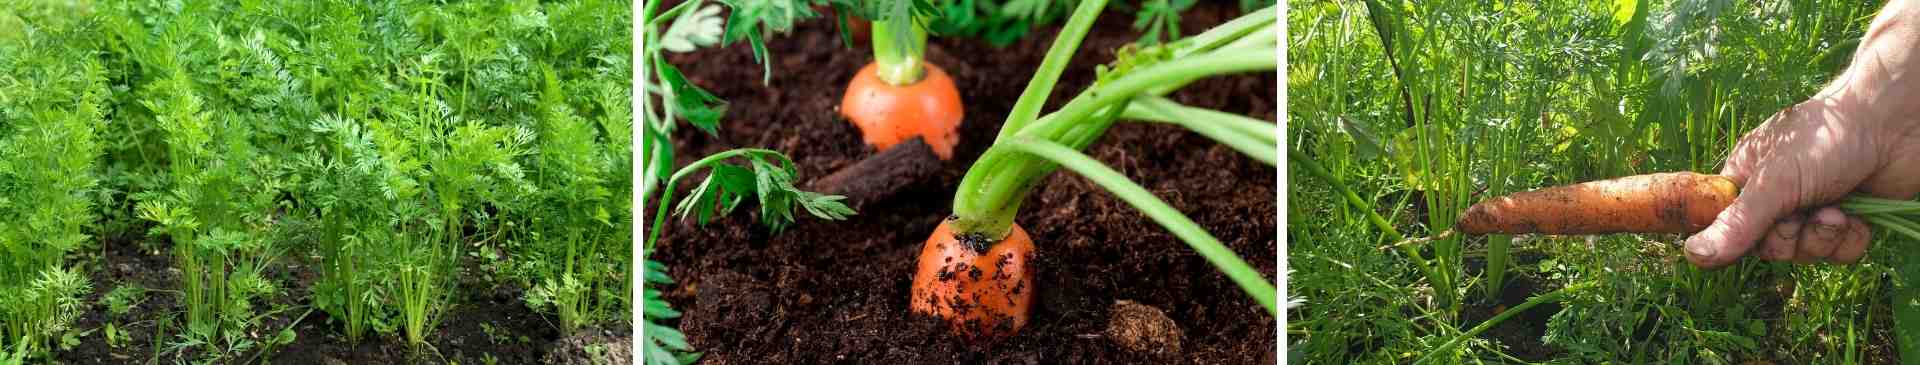 Carrot- How to Grow From Seed